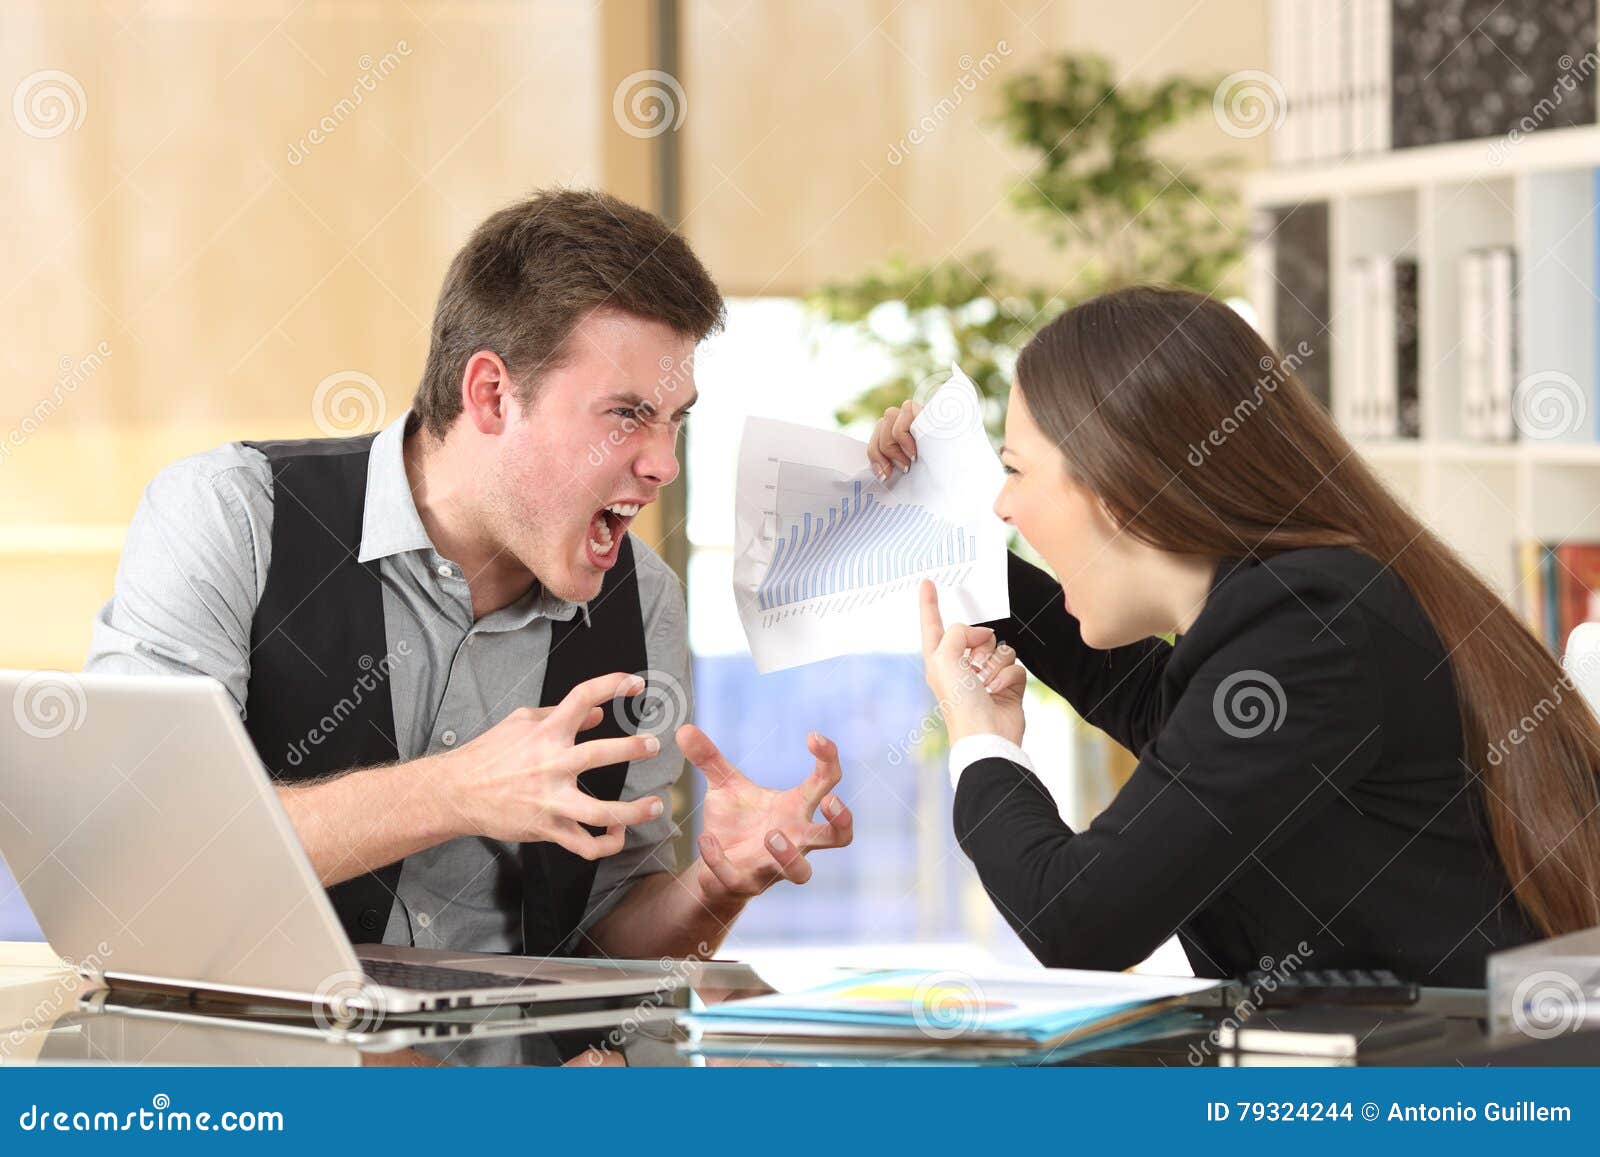 two angry businesspeople arguing furious